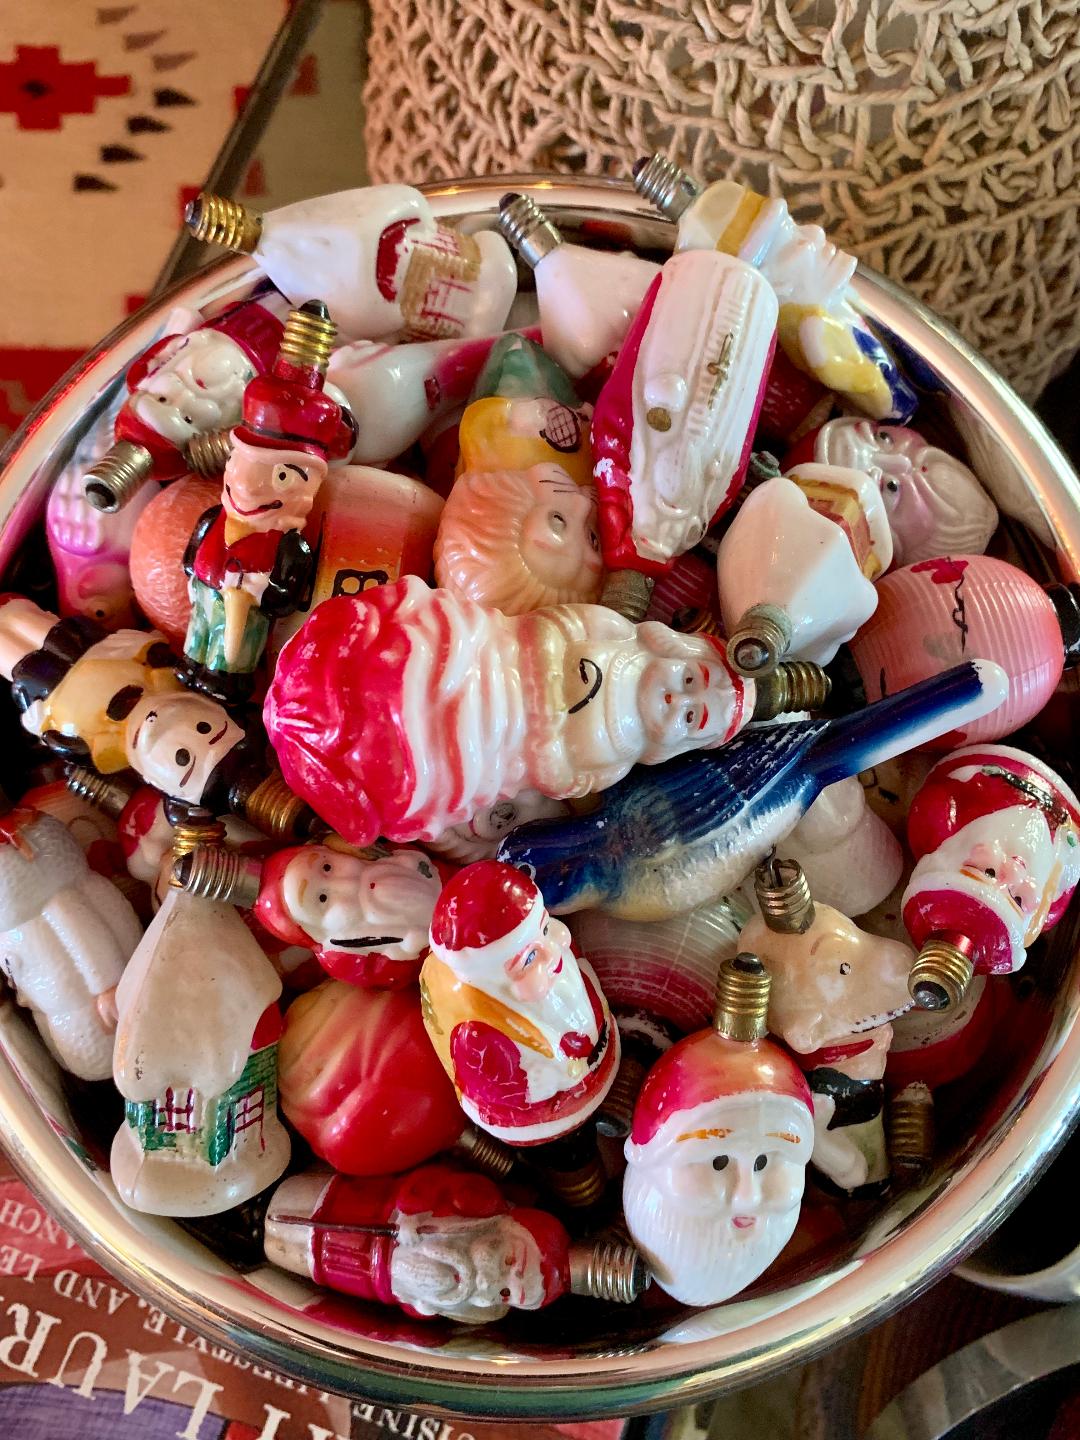 Fun collection of vintage figural bulbs for Christmas #vintage #vintagecollections #vintagechristmas #vintagecollectibles #collections #collectibles #collector #christmaslights #milkglass #christmasdisplay 